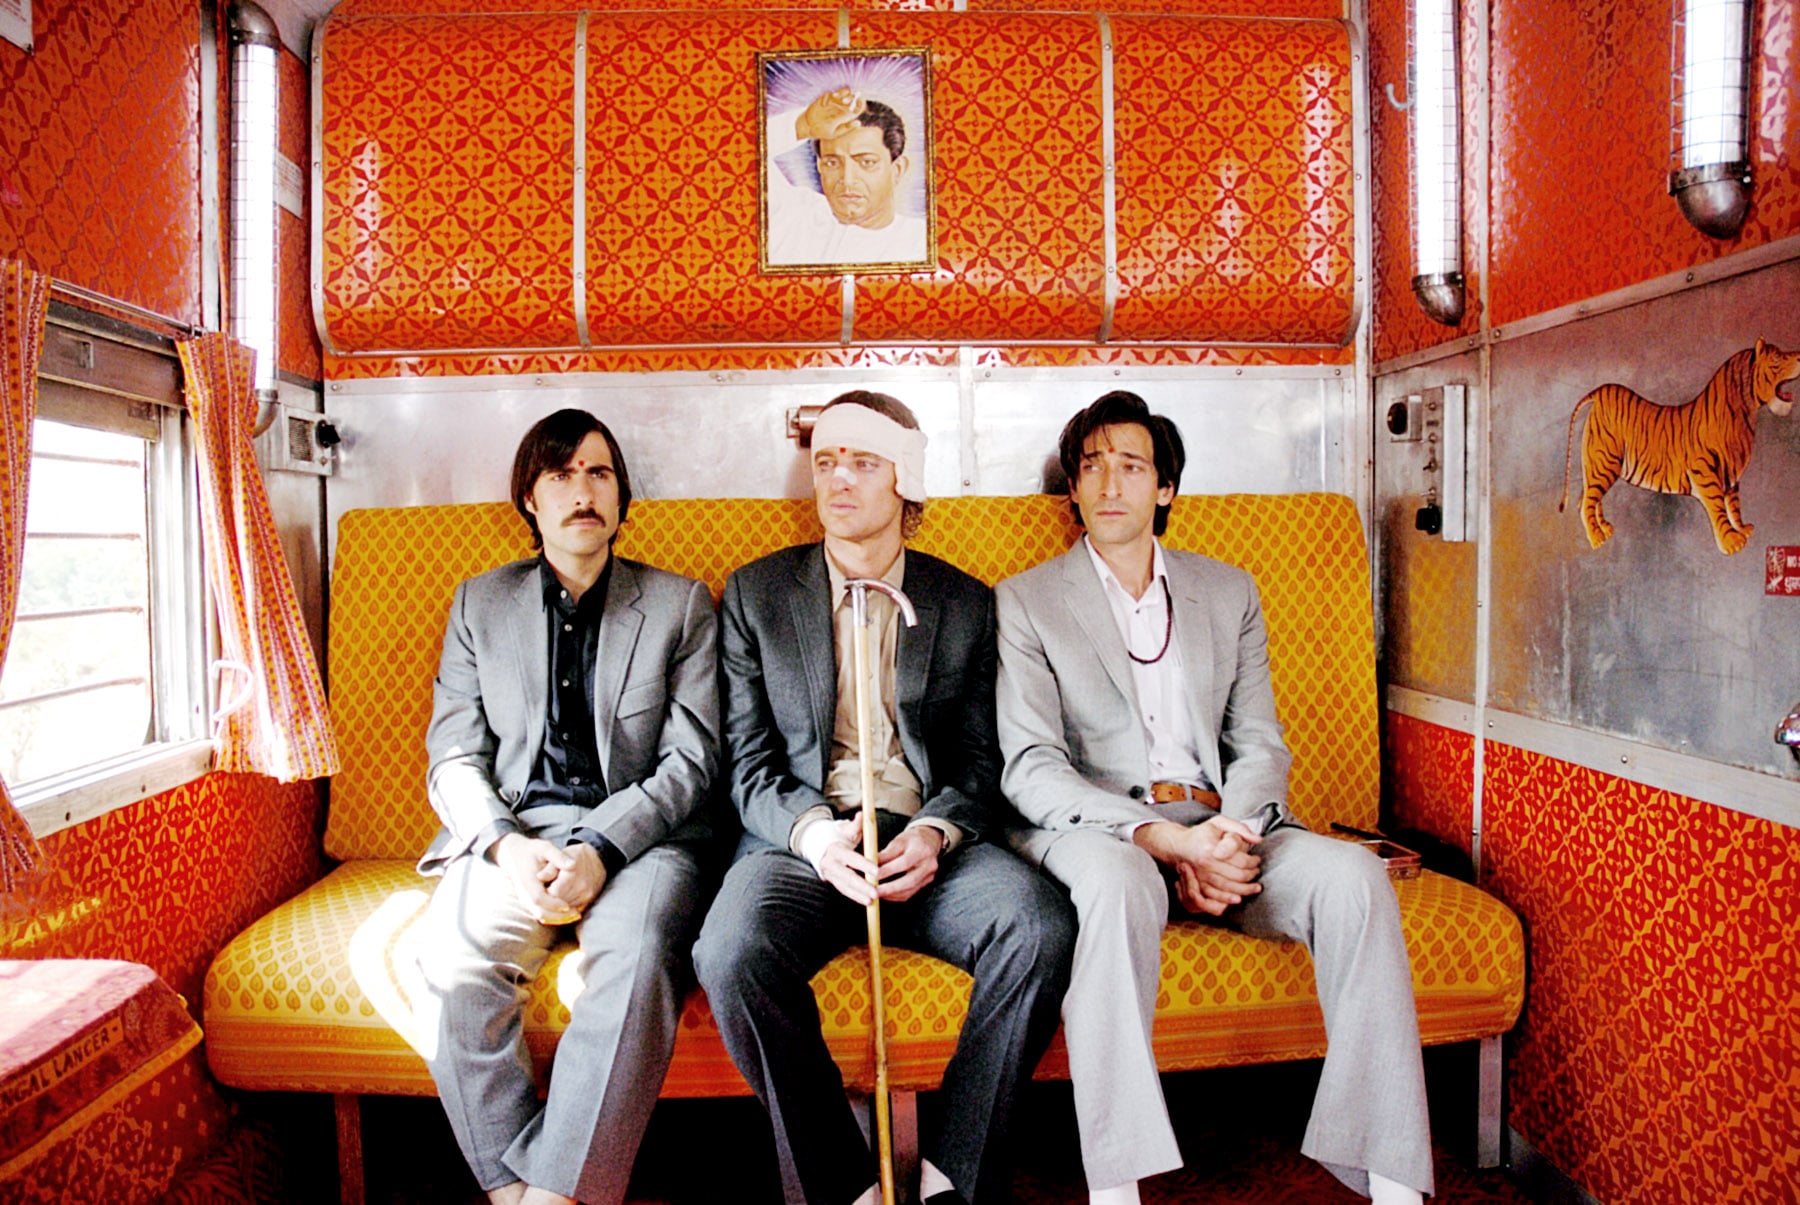 The Darjeeling Limited | Love The Royal Tenenbaums and Everything Wes Anderson? You'll Love These Movies, Too | POPSUGAR Entertainment Photo 8